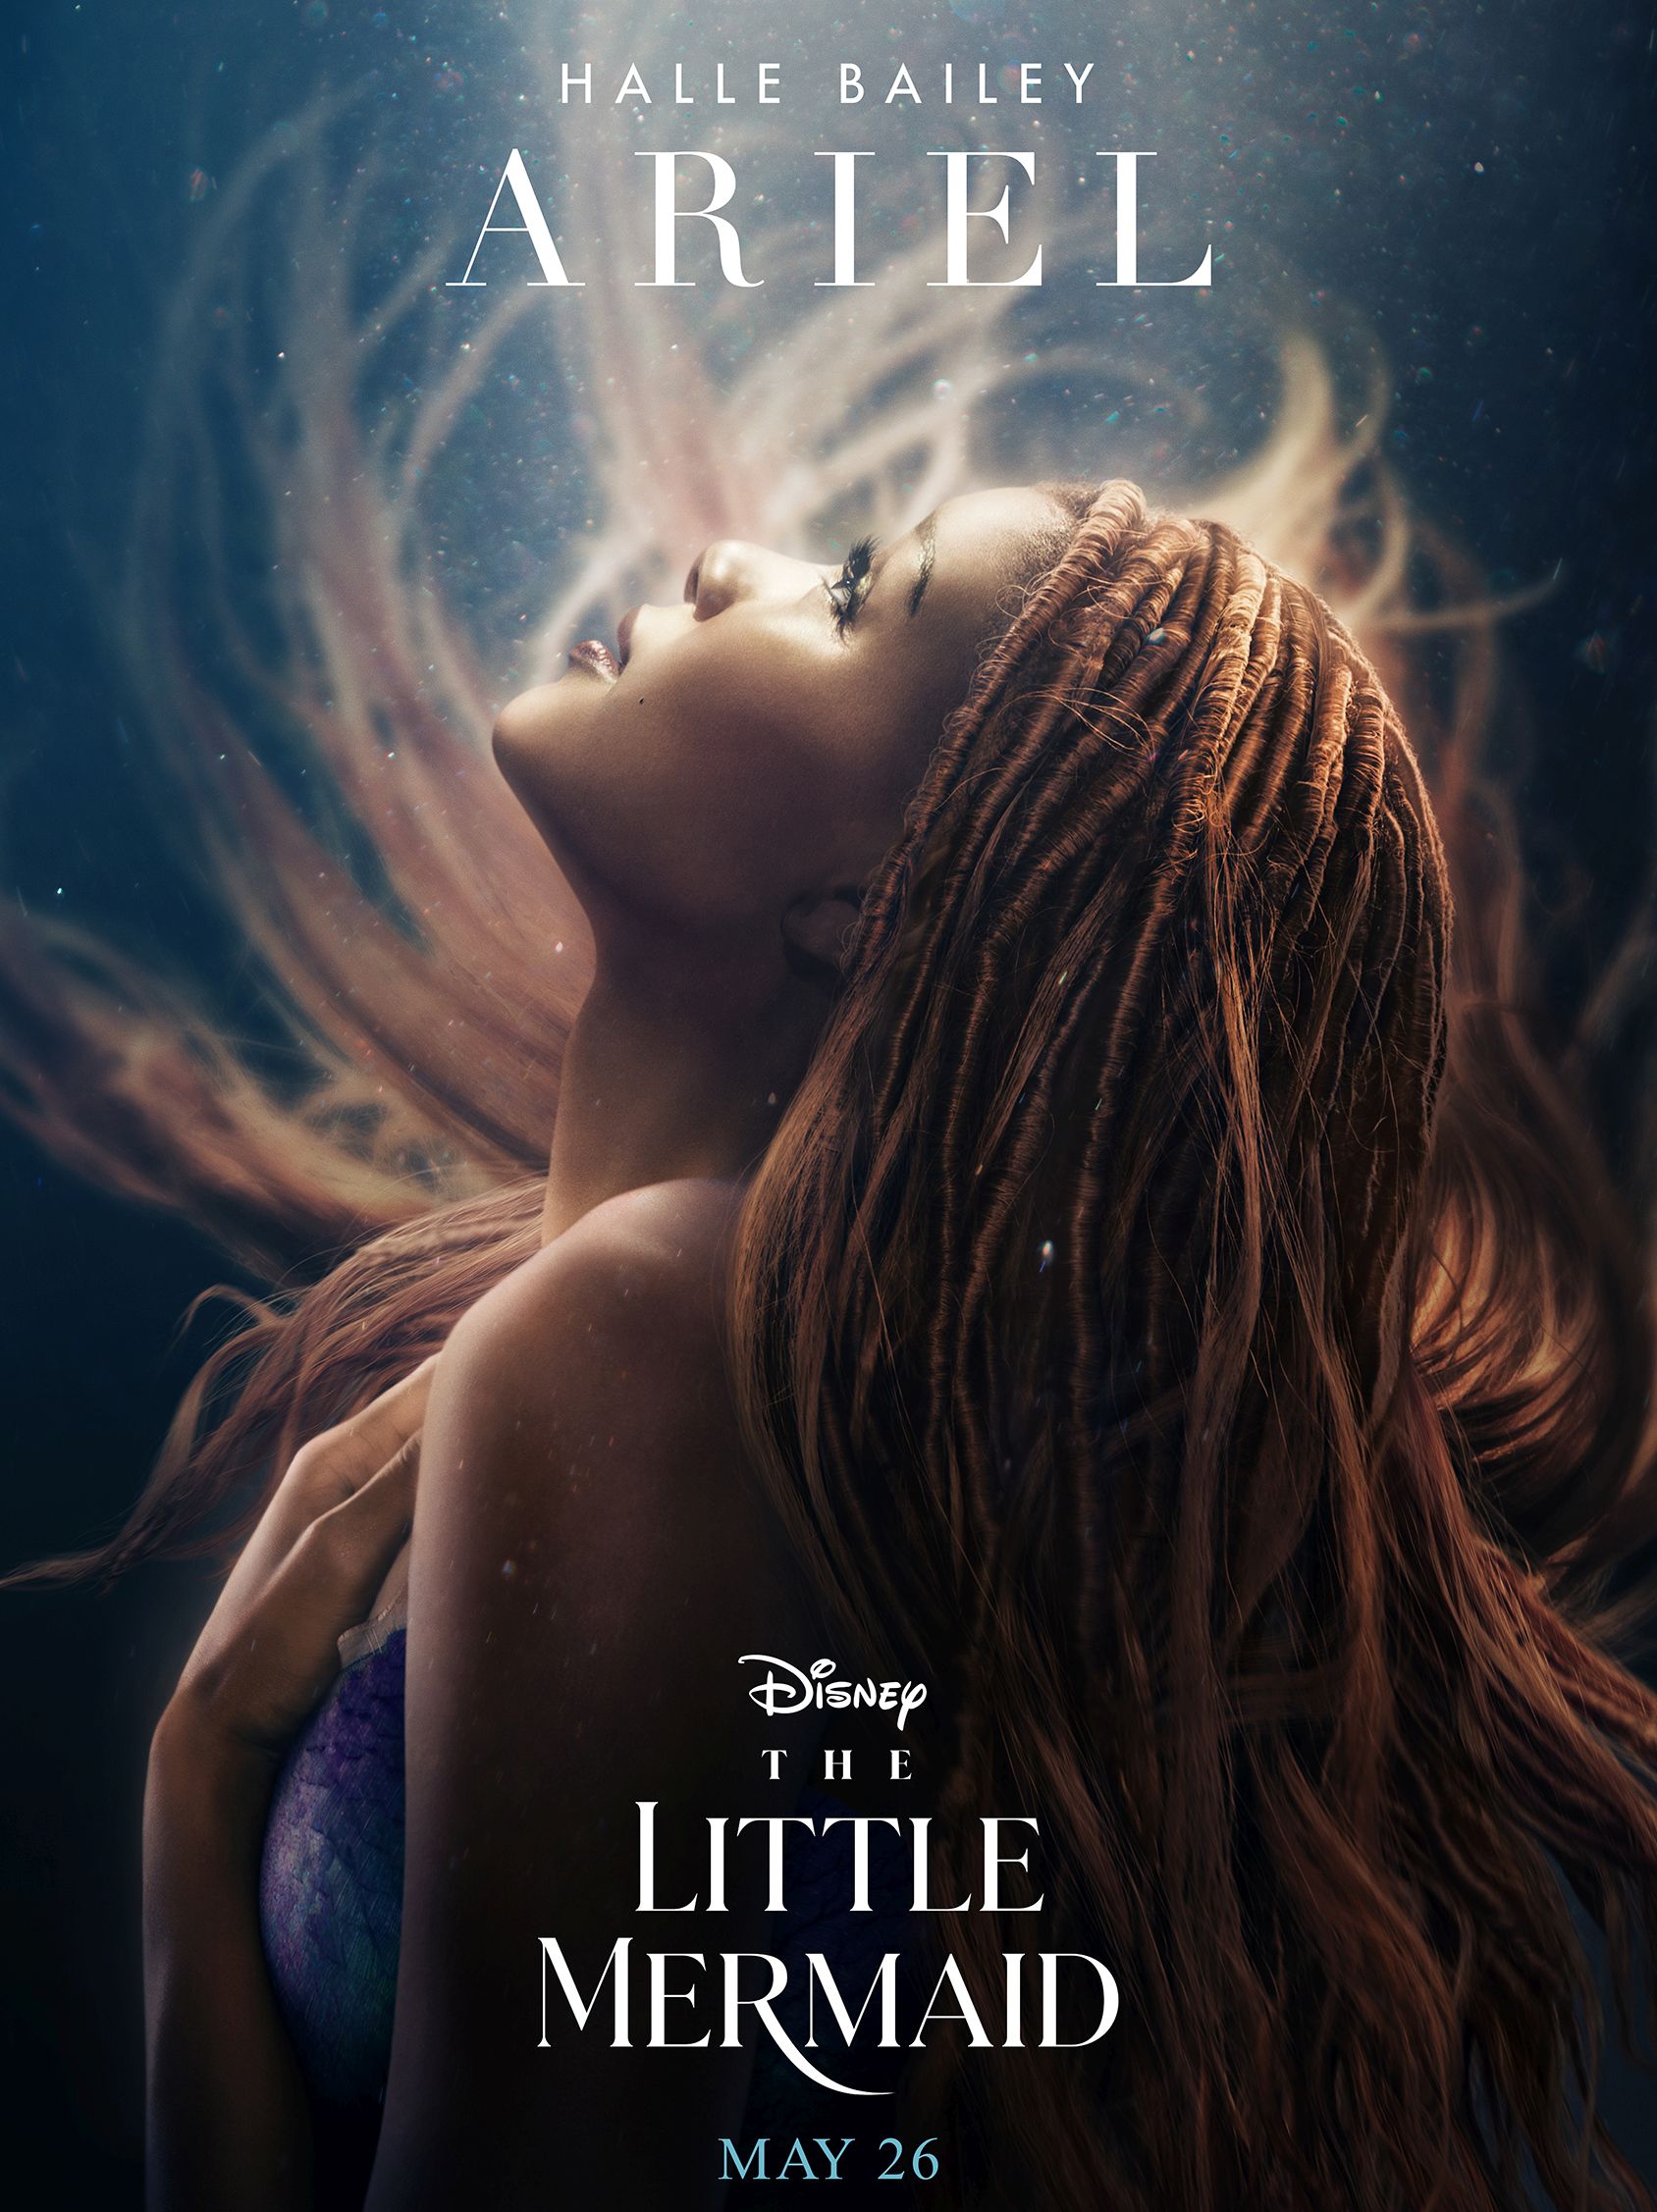 The new film inspired by the children's classic, The Little Mermaid, has Halle Bailey as an actress who has been criticized for her skin color (Disney)